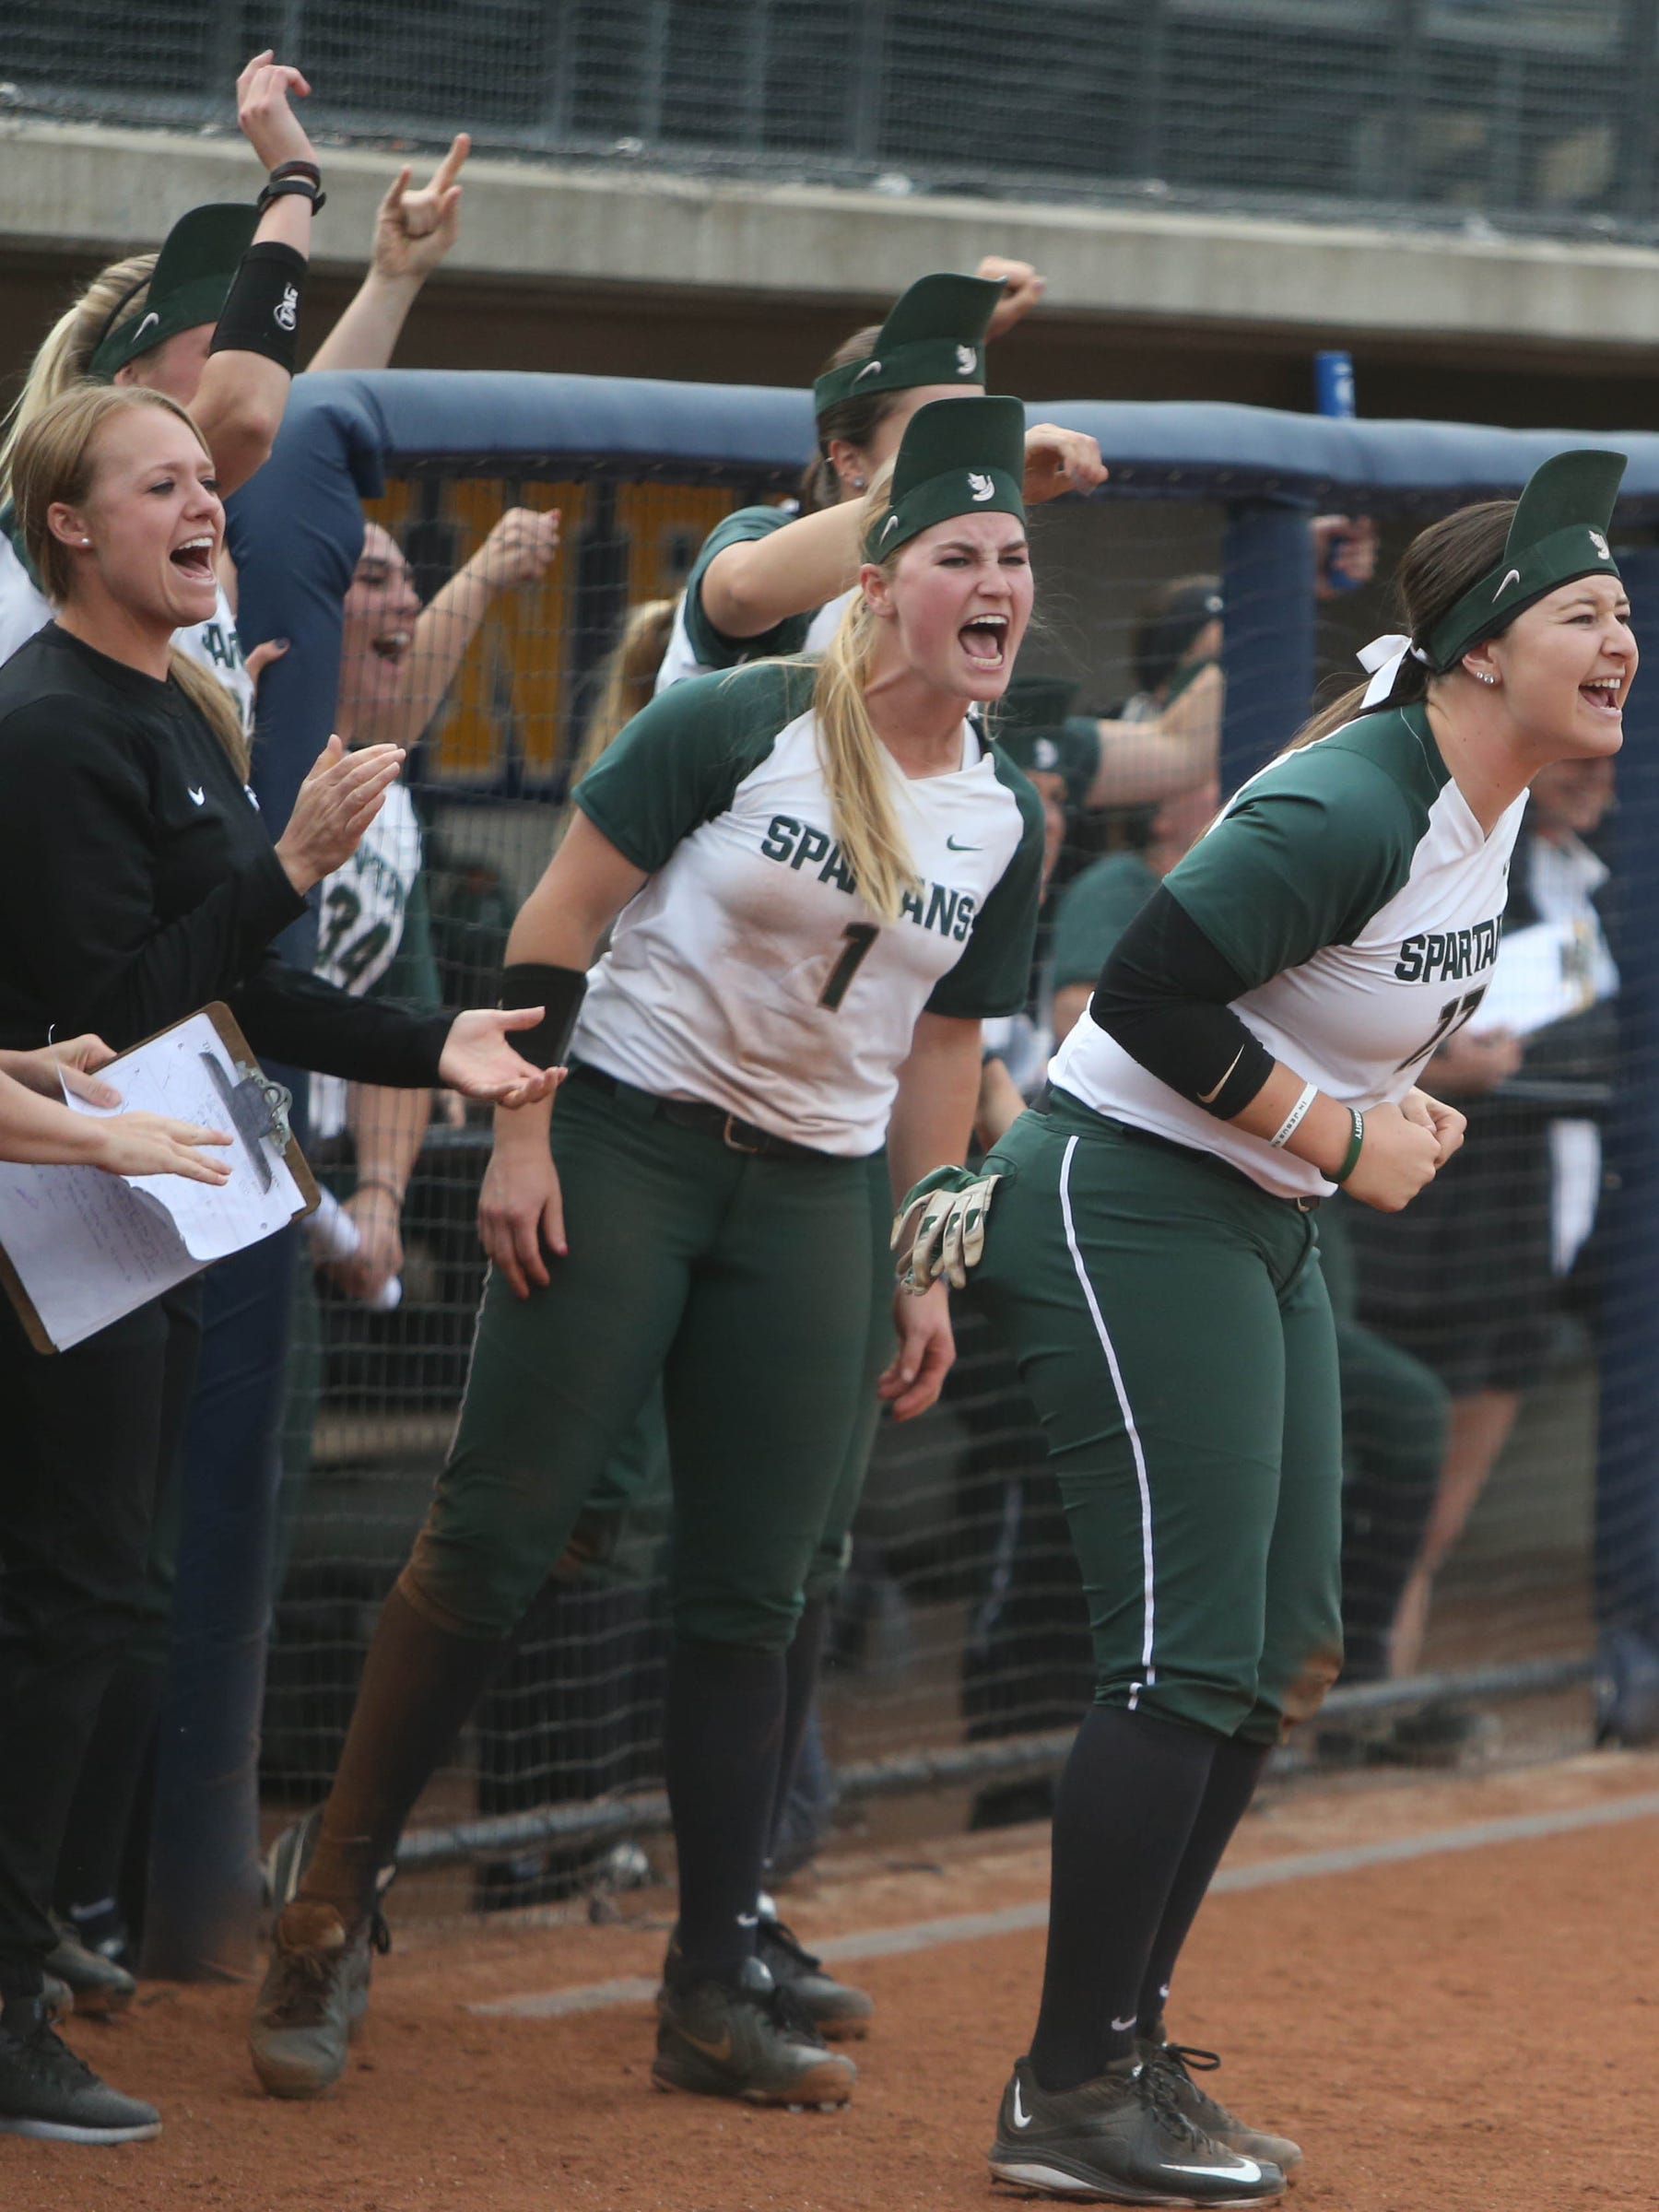 Msu Softball What A Difference 5 Years Makes